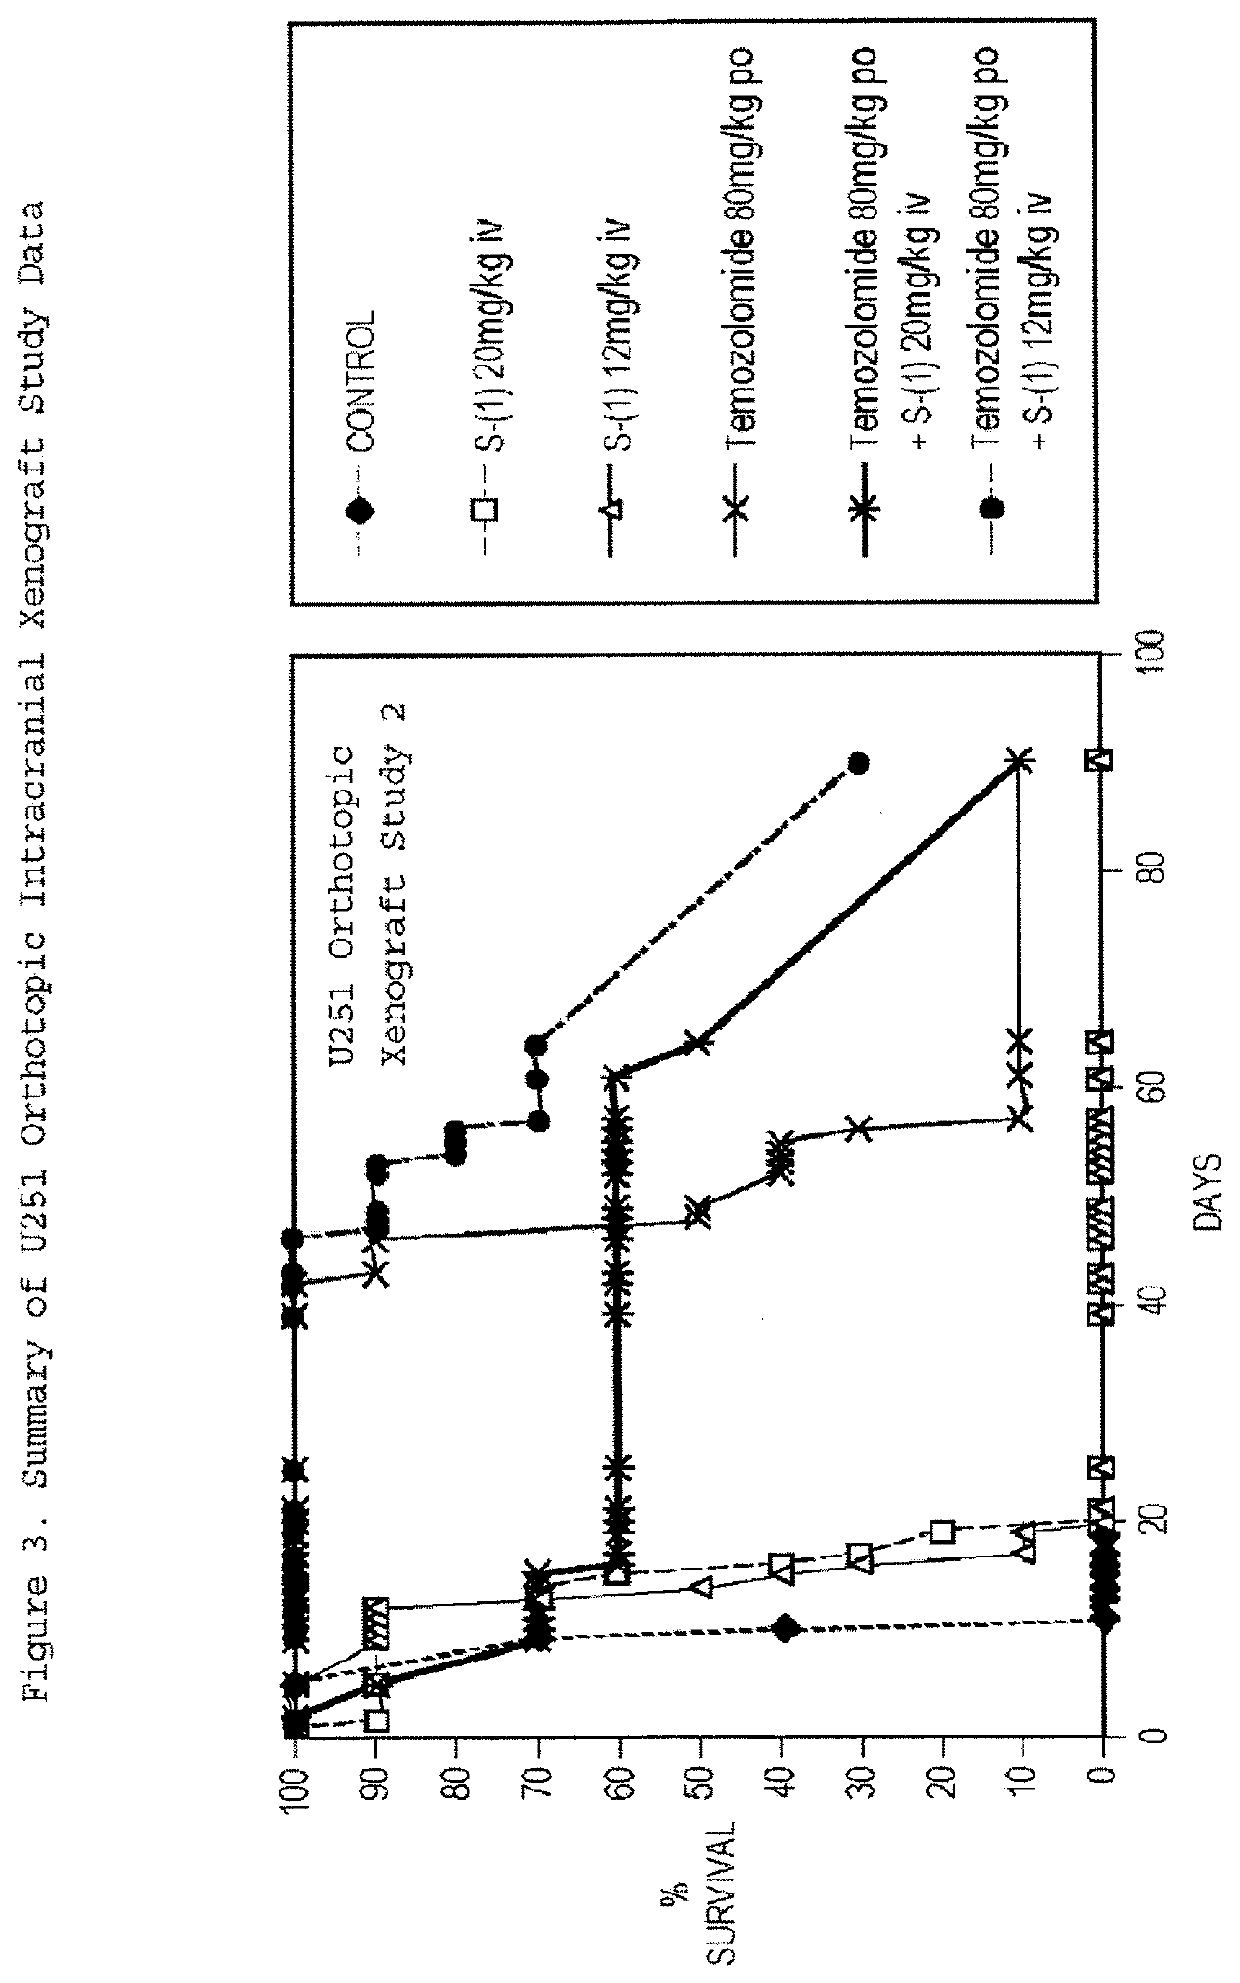 Taxane Analogs for the Treatment of Brain Cancer